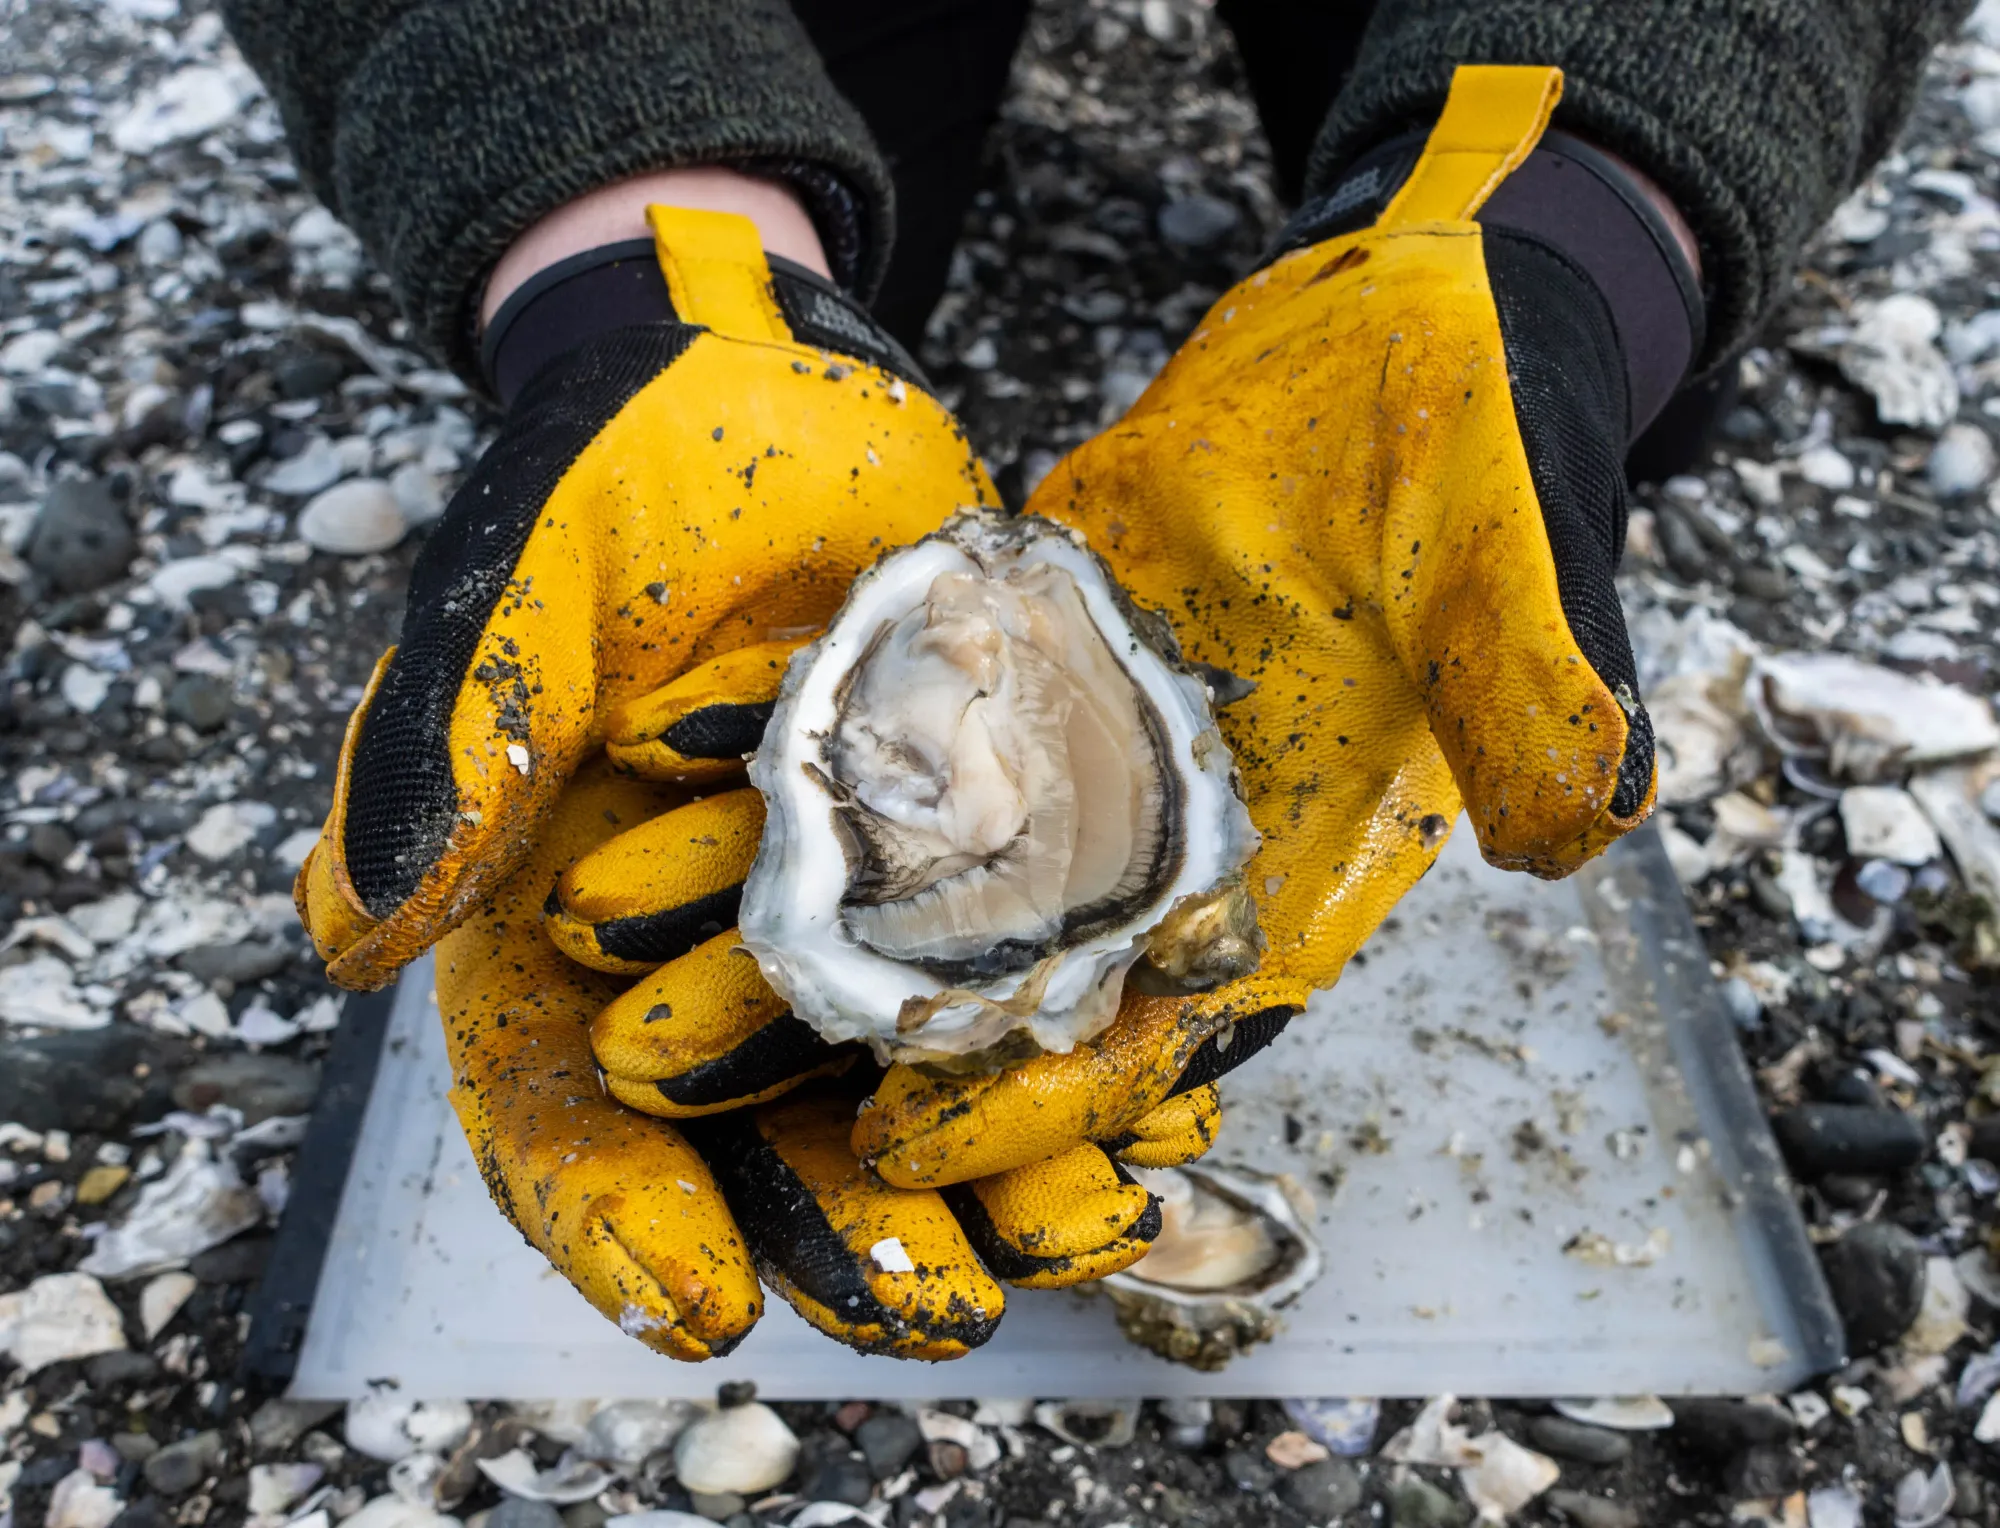 On Harvesting Oysters